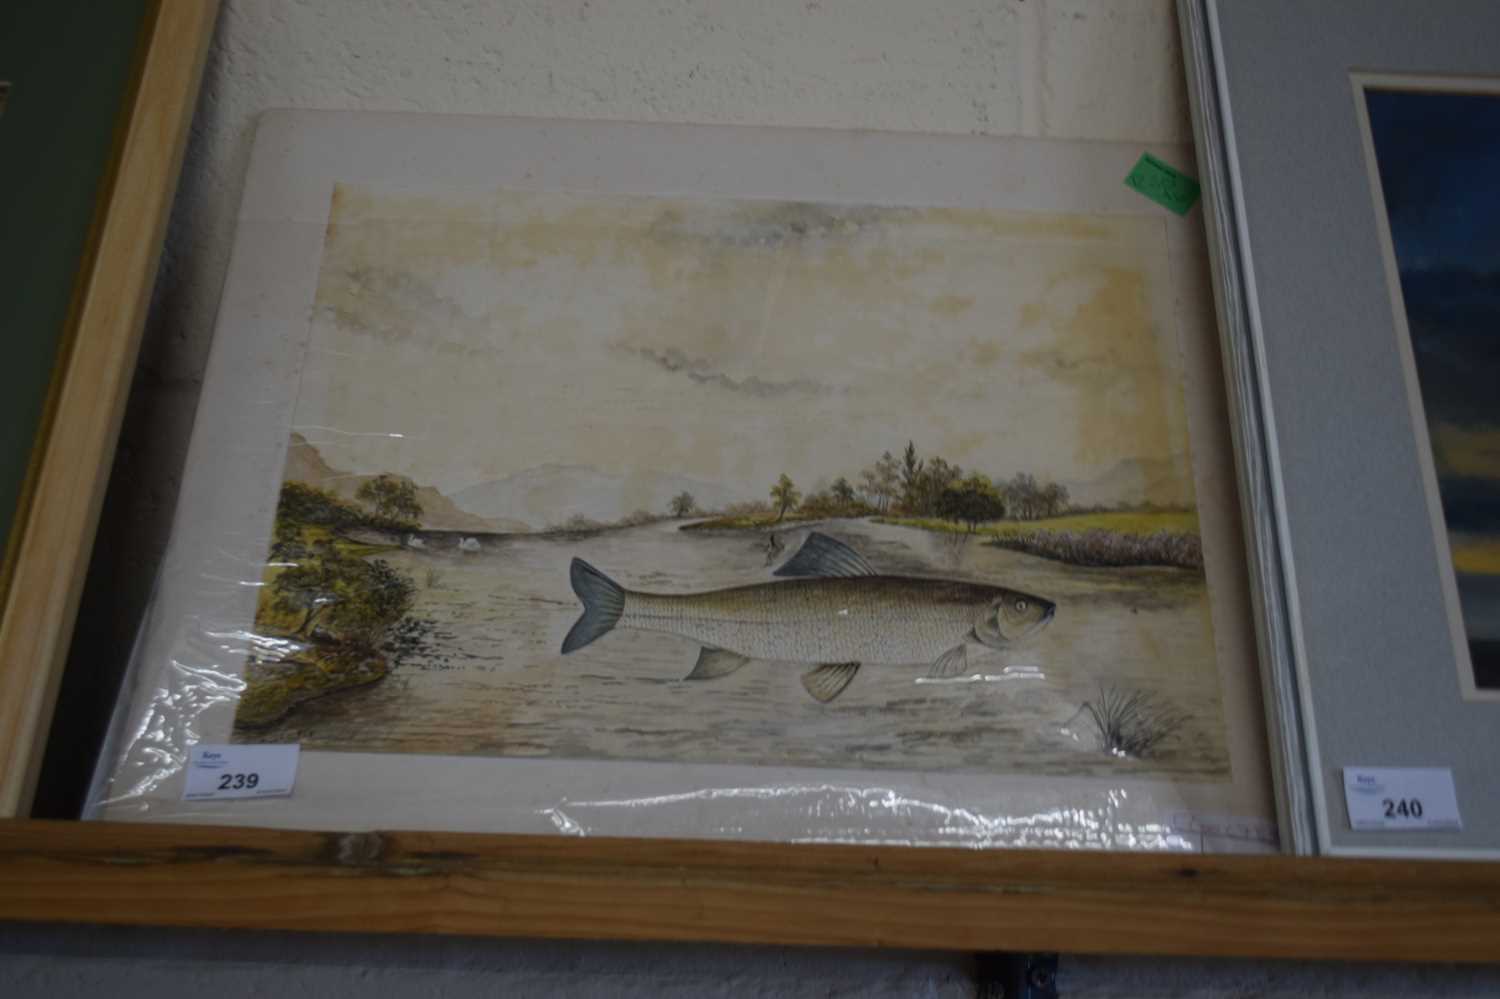 W TEMPLE, STUDY OF A RIVER SCENE WITH FISH IN FOREGROUND, WATERCOLOUR, MOUNTED ON CARD BACKING